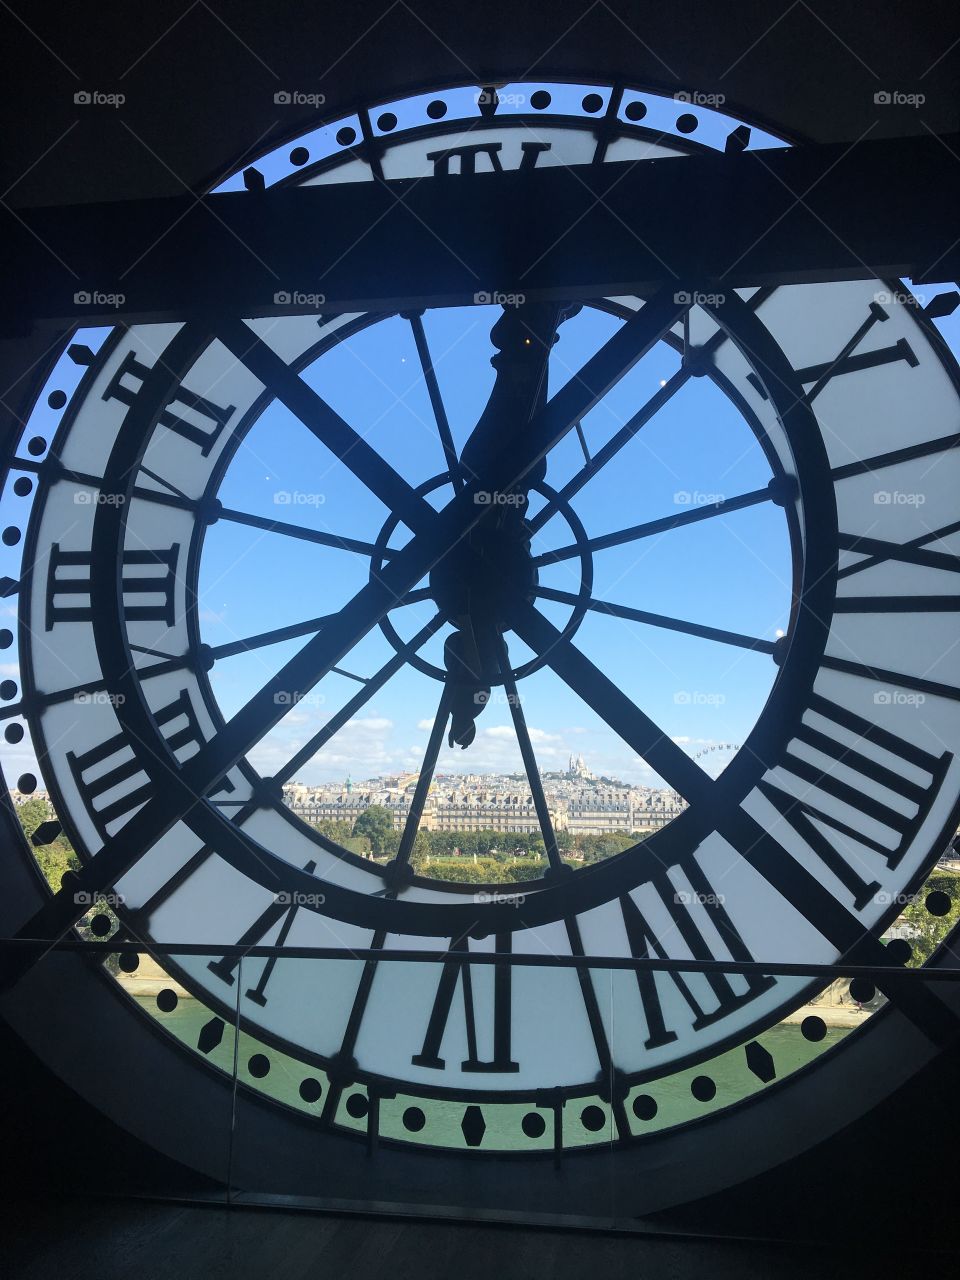 Musee d'orsay views, overlooking the city of Paris through this unique window. A window in time I like to call it!